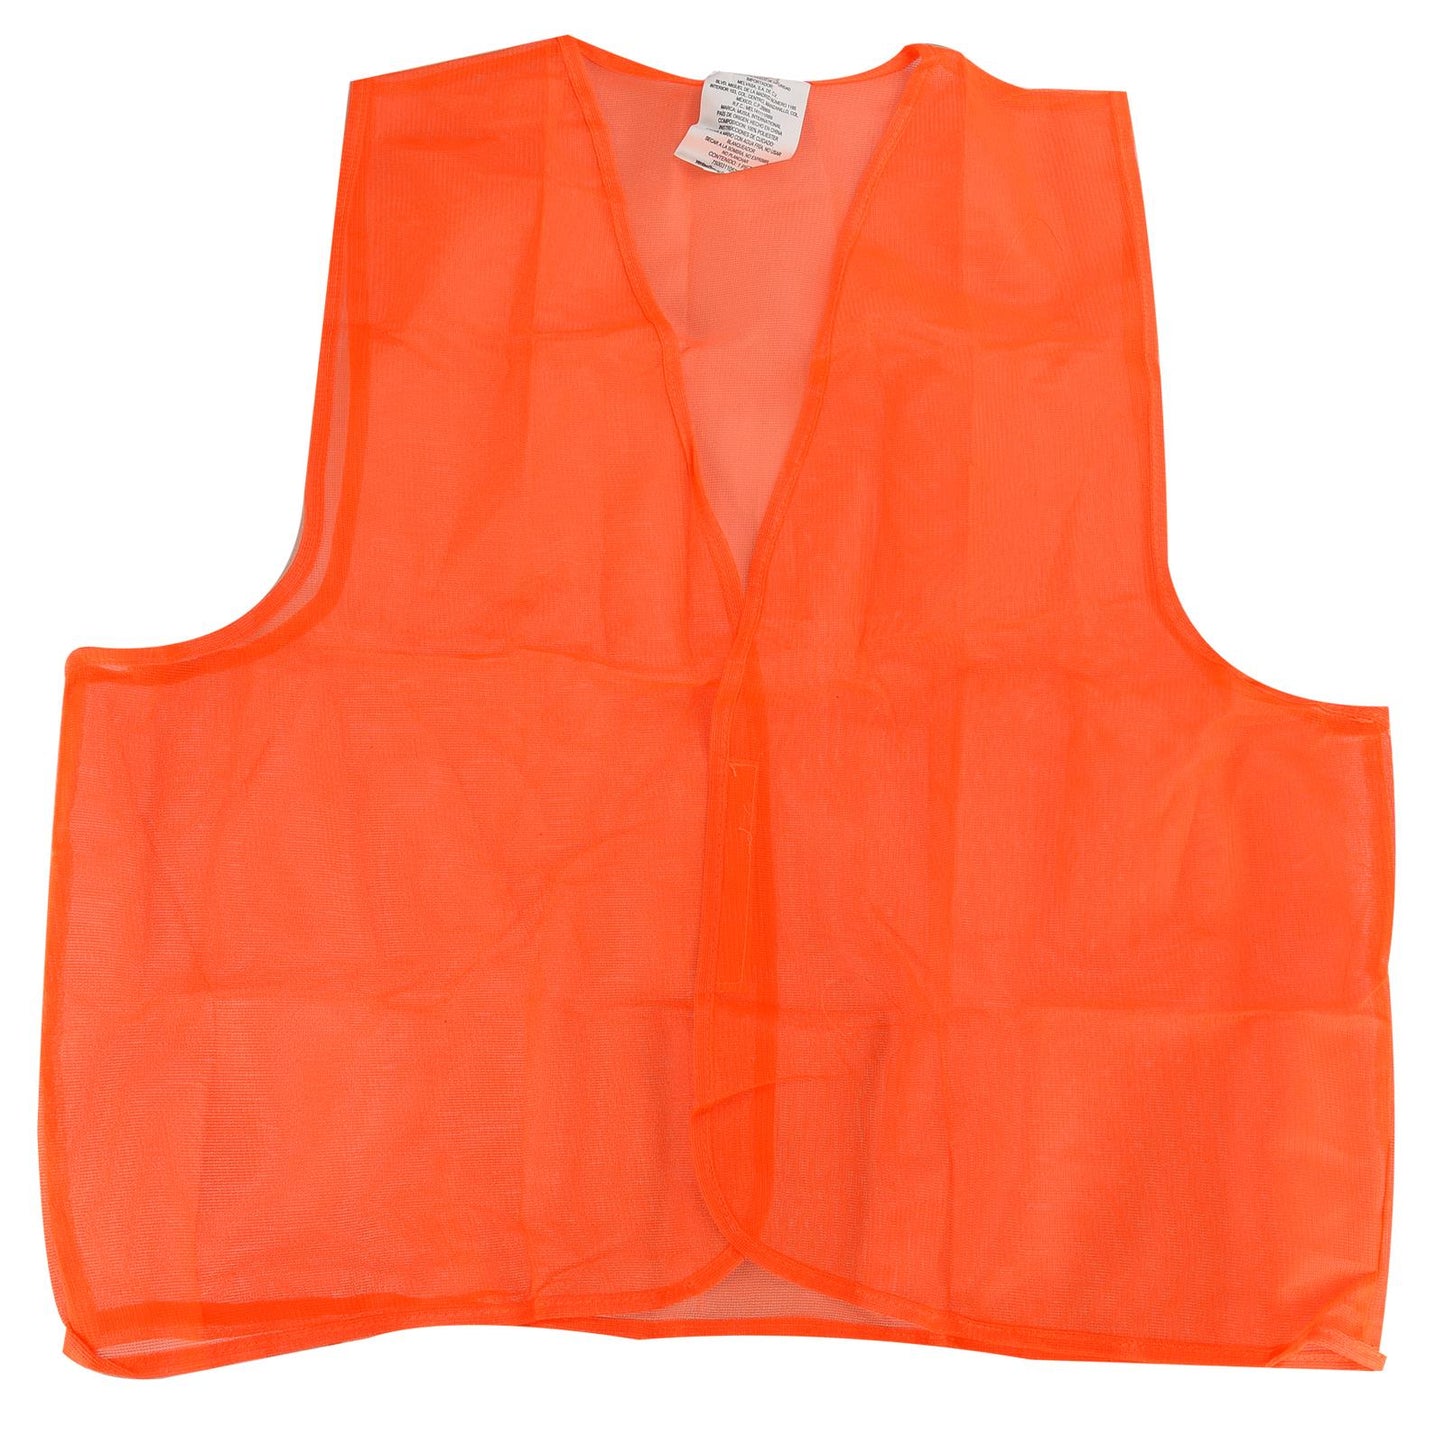 High Visibility Fluorescent Safety Vest For Men And Women